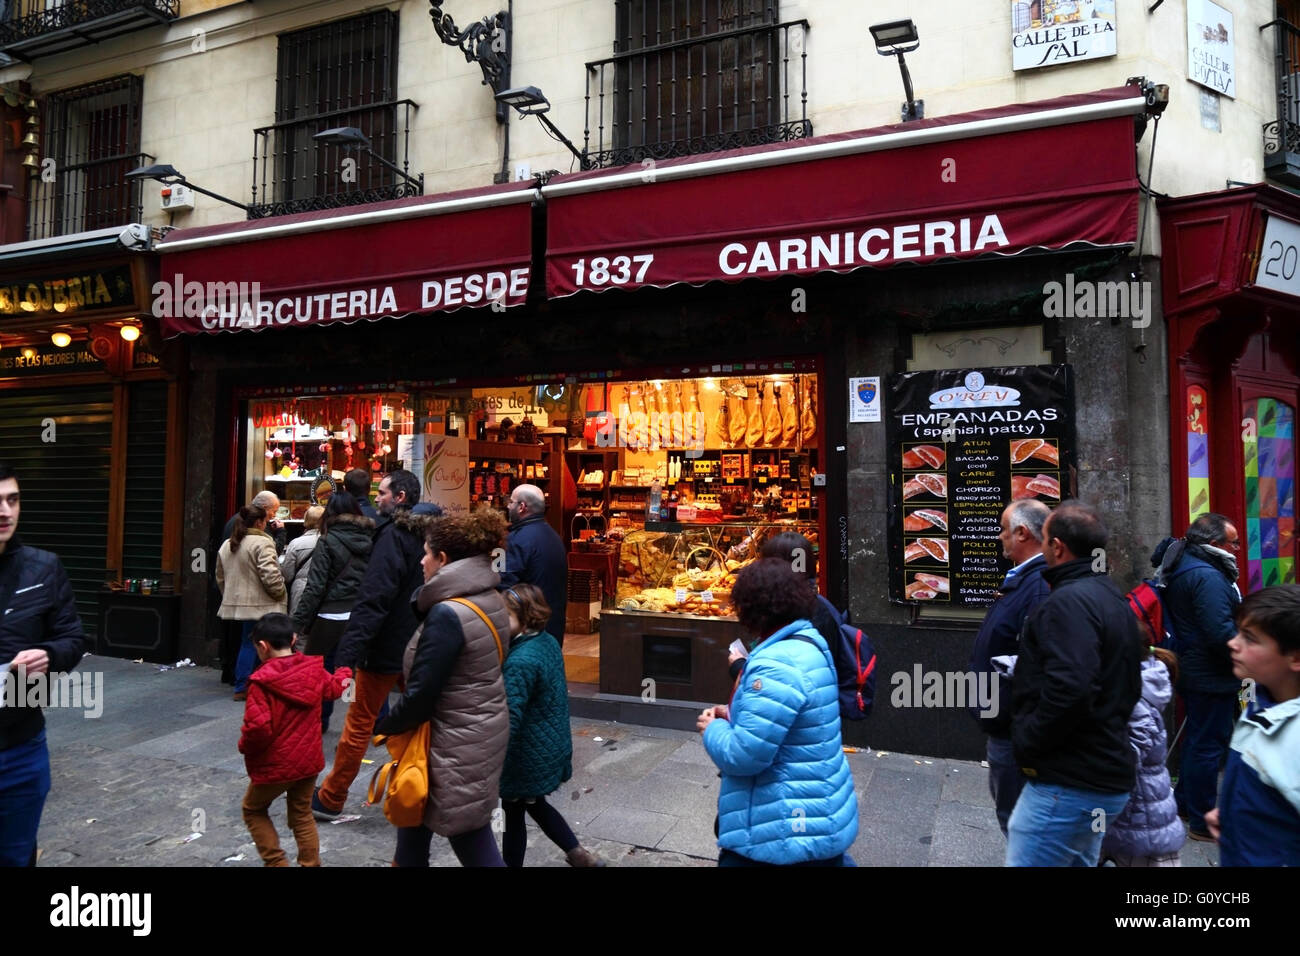 Traditional charcuteria delicatessen food shop in central Madrid, Spain Stock Photo